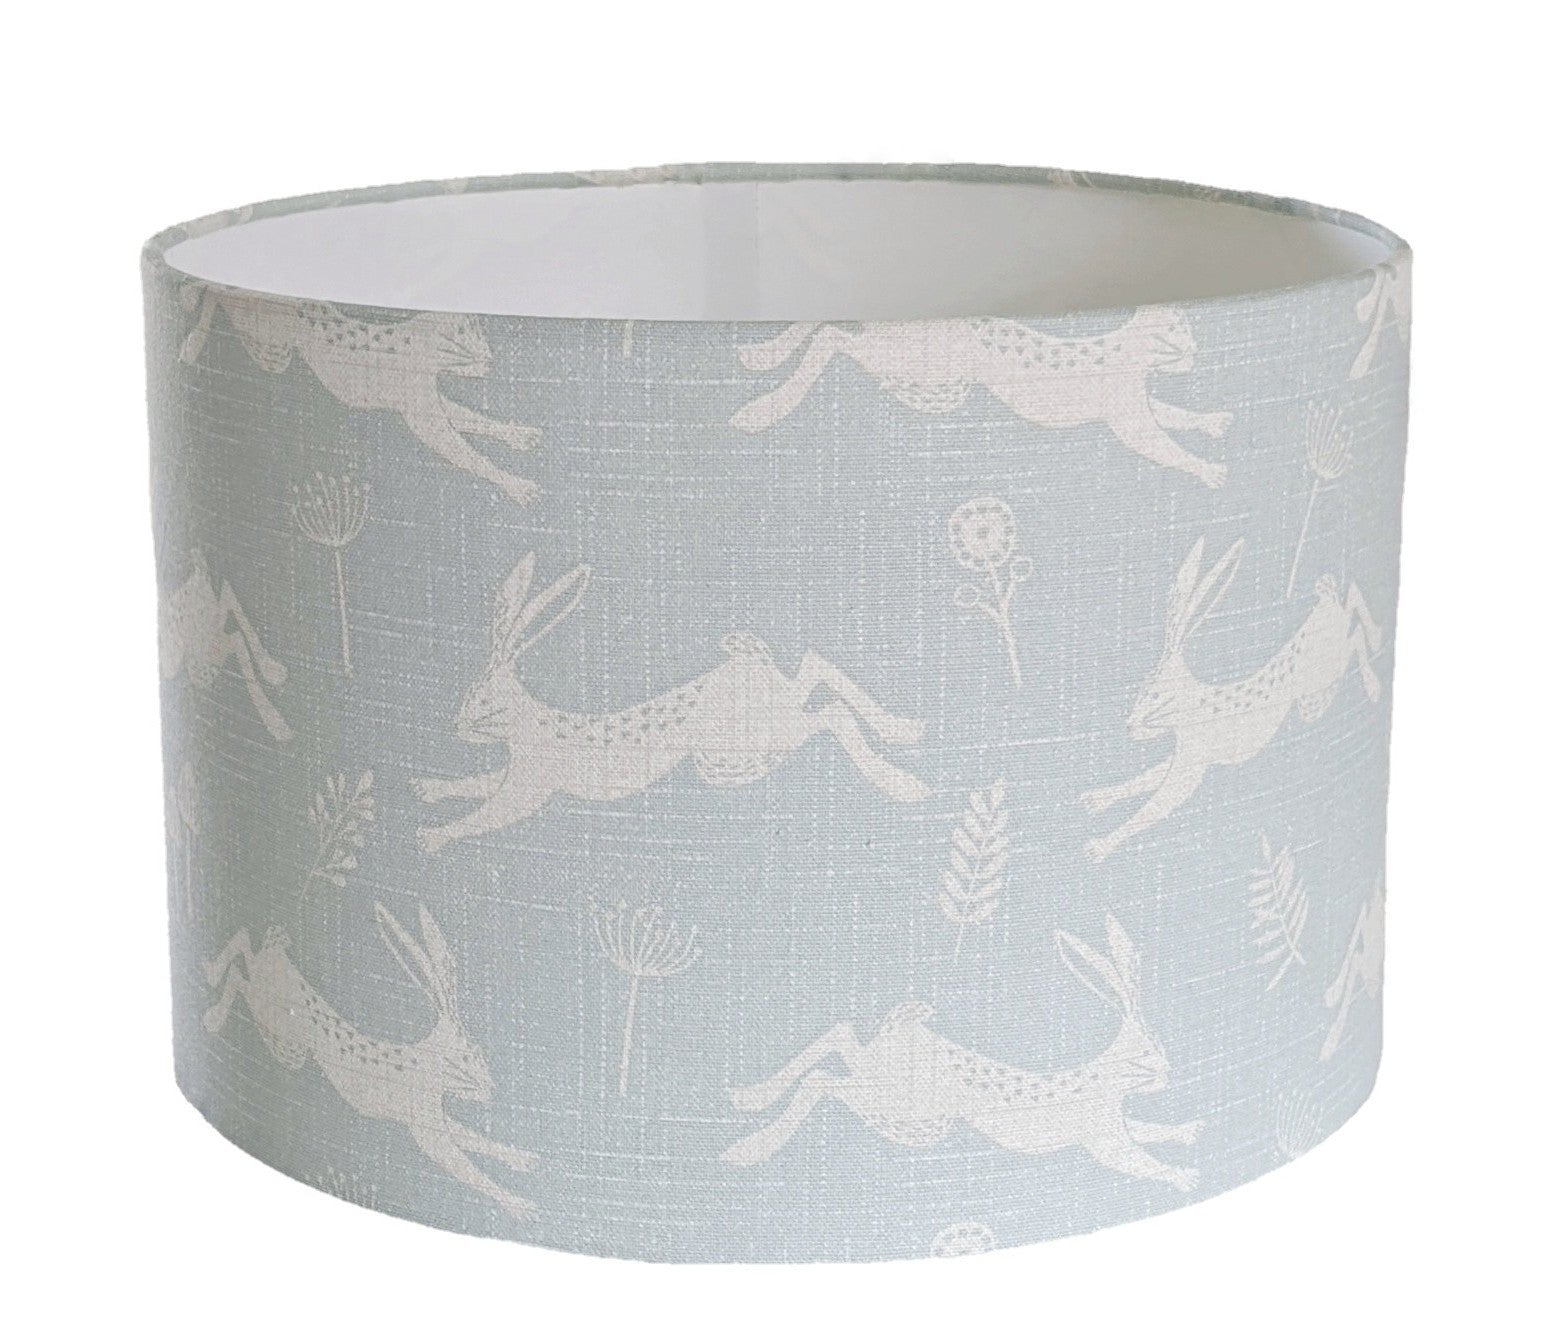 Leaping Hare lampshade for a lamp -  20cm, 30cm and 40cm